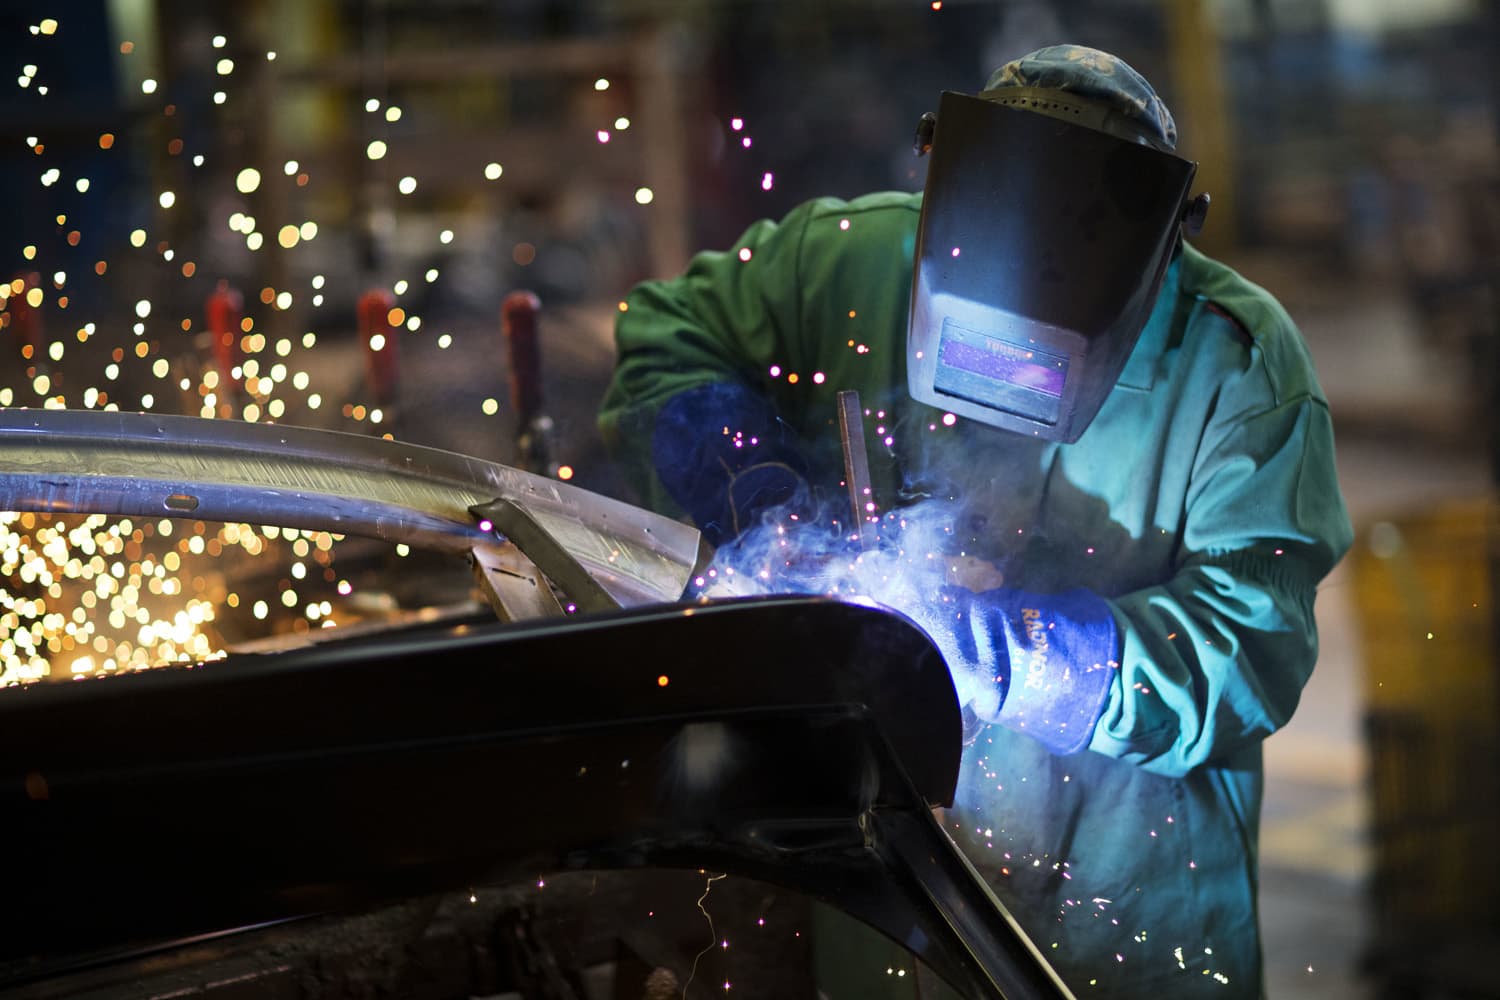  In this Sept. 18, 2015 file photo, sparks fly as a welder works on a frame for a school bus at Blue Bird Corporation's manufacturing facility in Fort Valley, Ga. (David Goldman/AP)